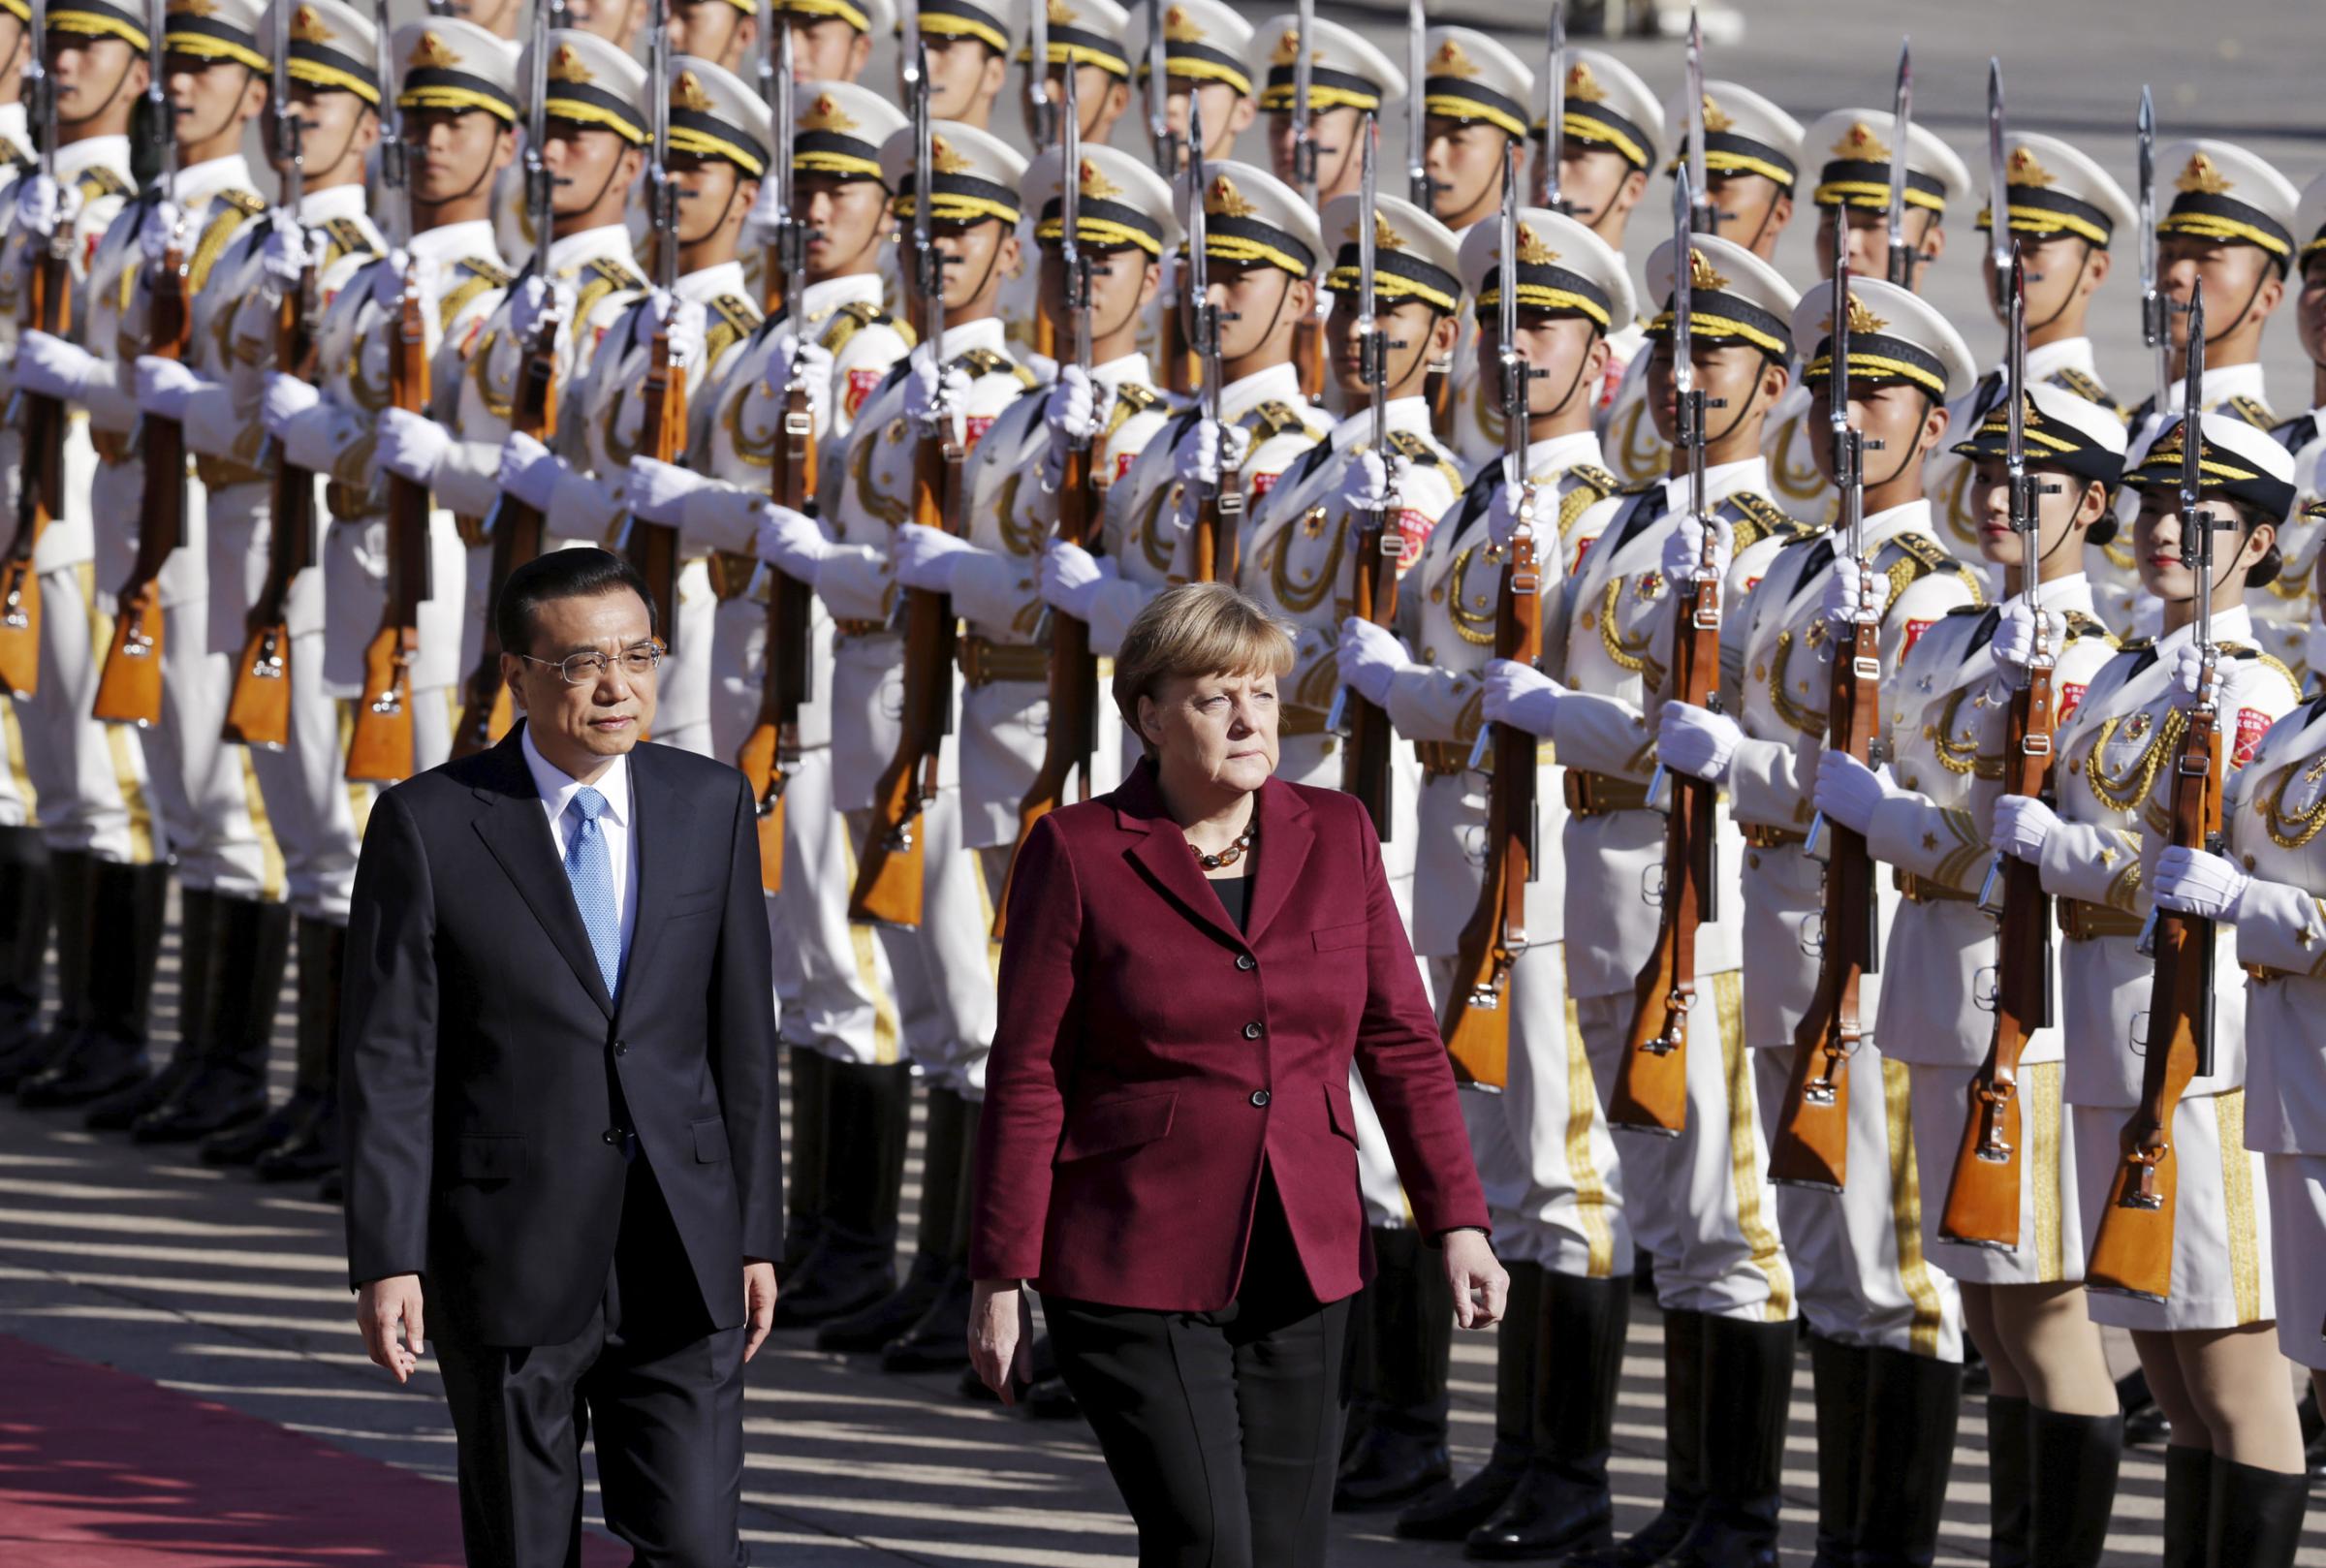 China's Premier Li Keqiang and Germany's Chancellor Angela Merkel inspect honor guards during a welcoming ceremony outside the Great Hall of the People in Beijing on Oct. 29, 2015.